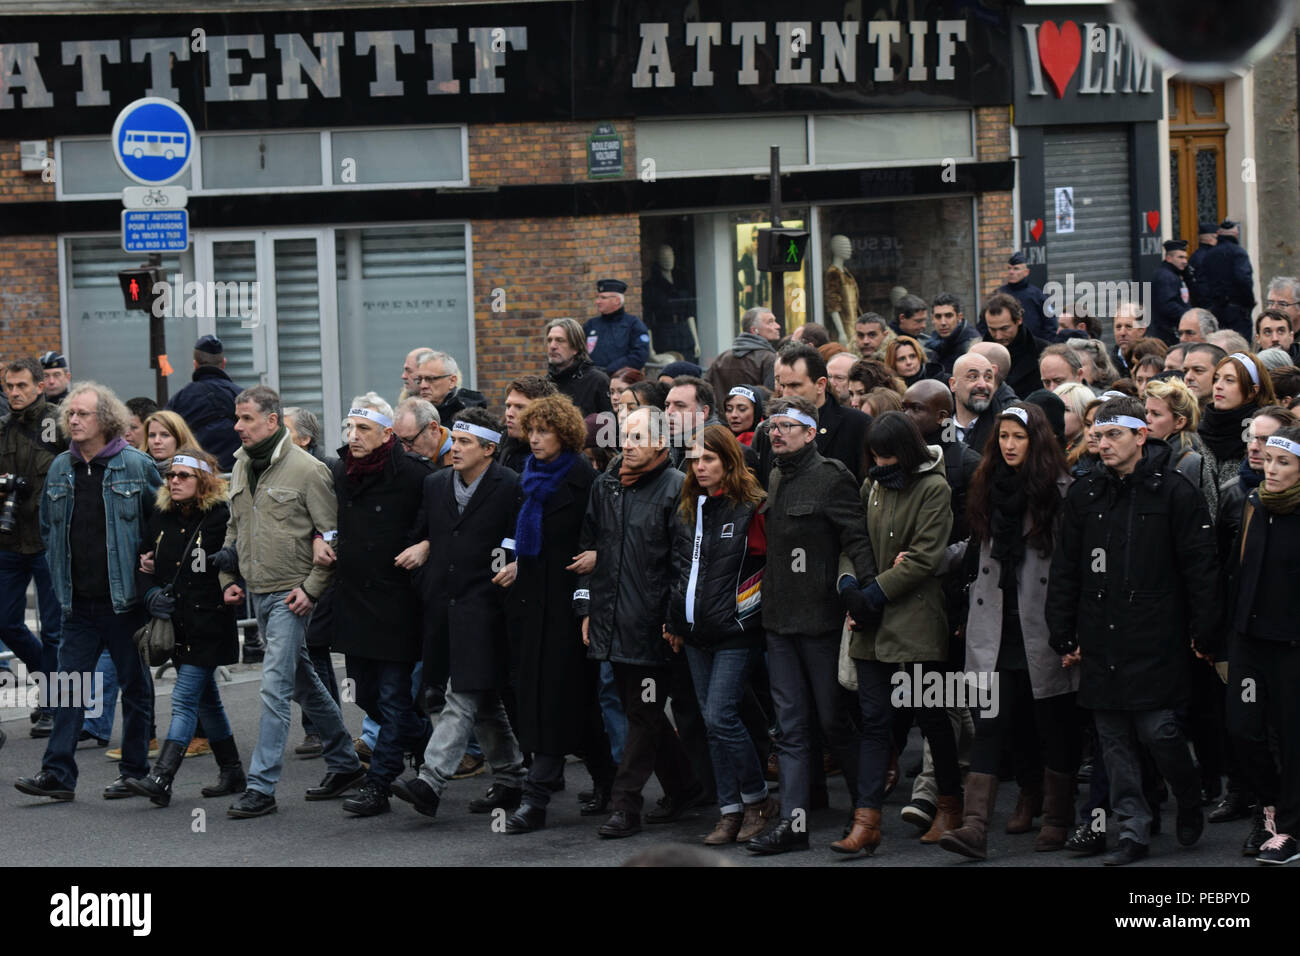 January 11, 2015 - Paris, France:  Family members and close friends of Charlie Hebdo victims, including senior cartoonist Renaud Luzier (known as 'Luz'), attend a mass unity rally following the recent Paris terrorist attacks.  Four million people demonstrated across the country in a 'Marche Republicaine' (Republican March) celebrating the nation's unity in face of terrorist threats. Thousands of people had banners or cartoons referring to Charlie Hebdo, the satirical magazine whose office was targeted by Islamist gunmen earlier in the week. La grande marche republicaine en hommage aux victimes Stock Photo